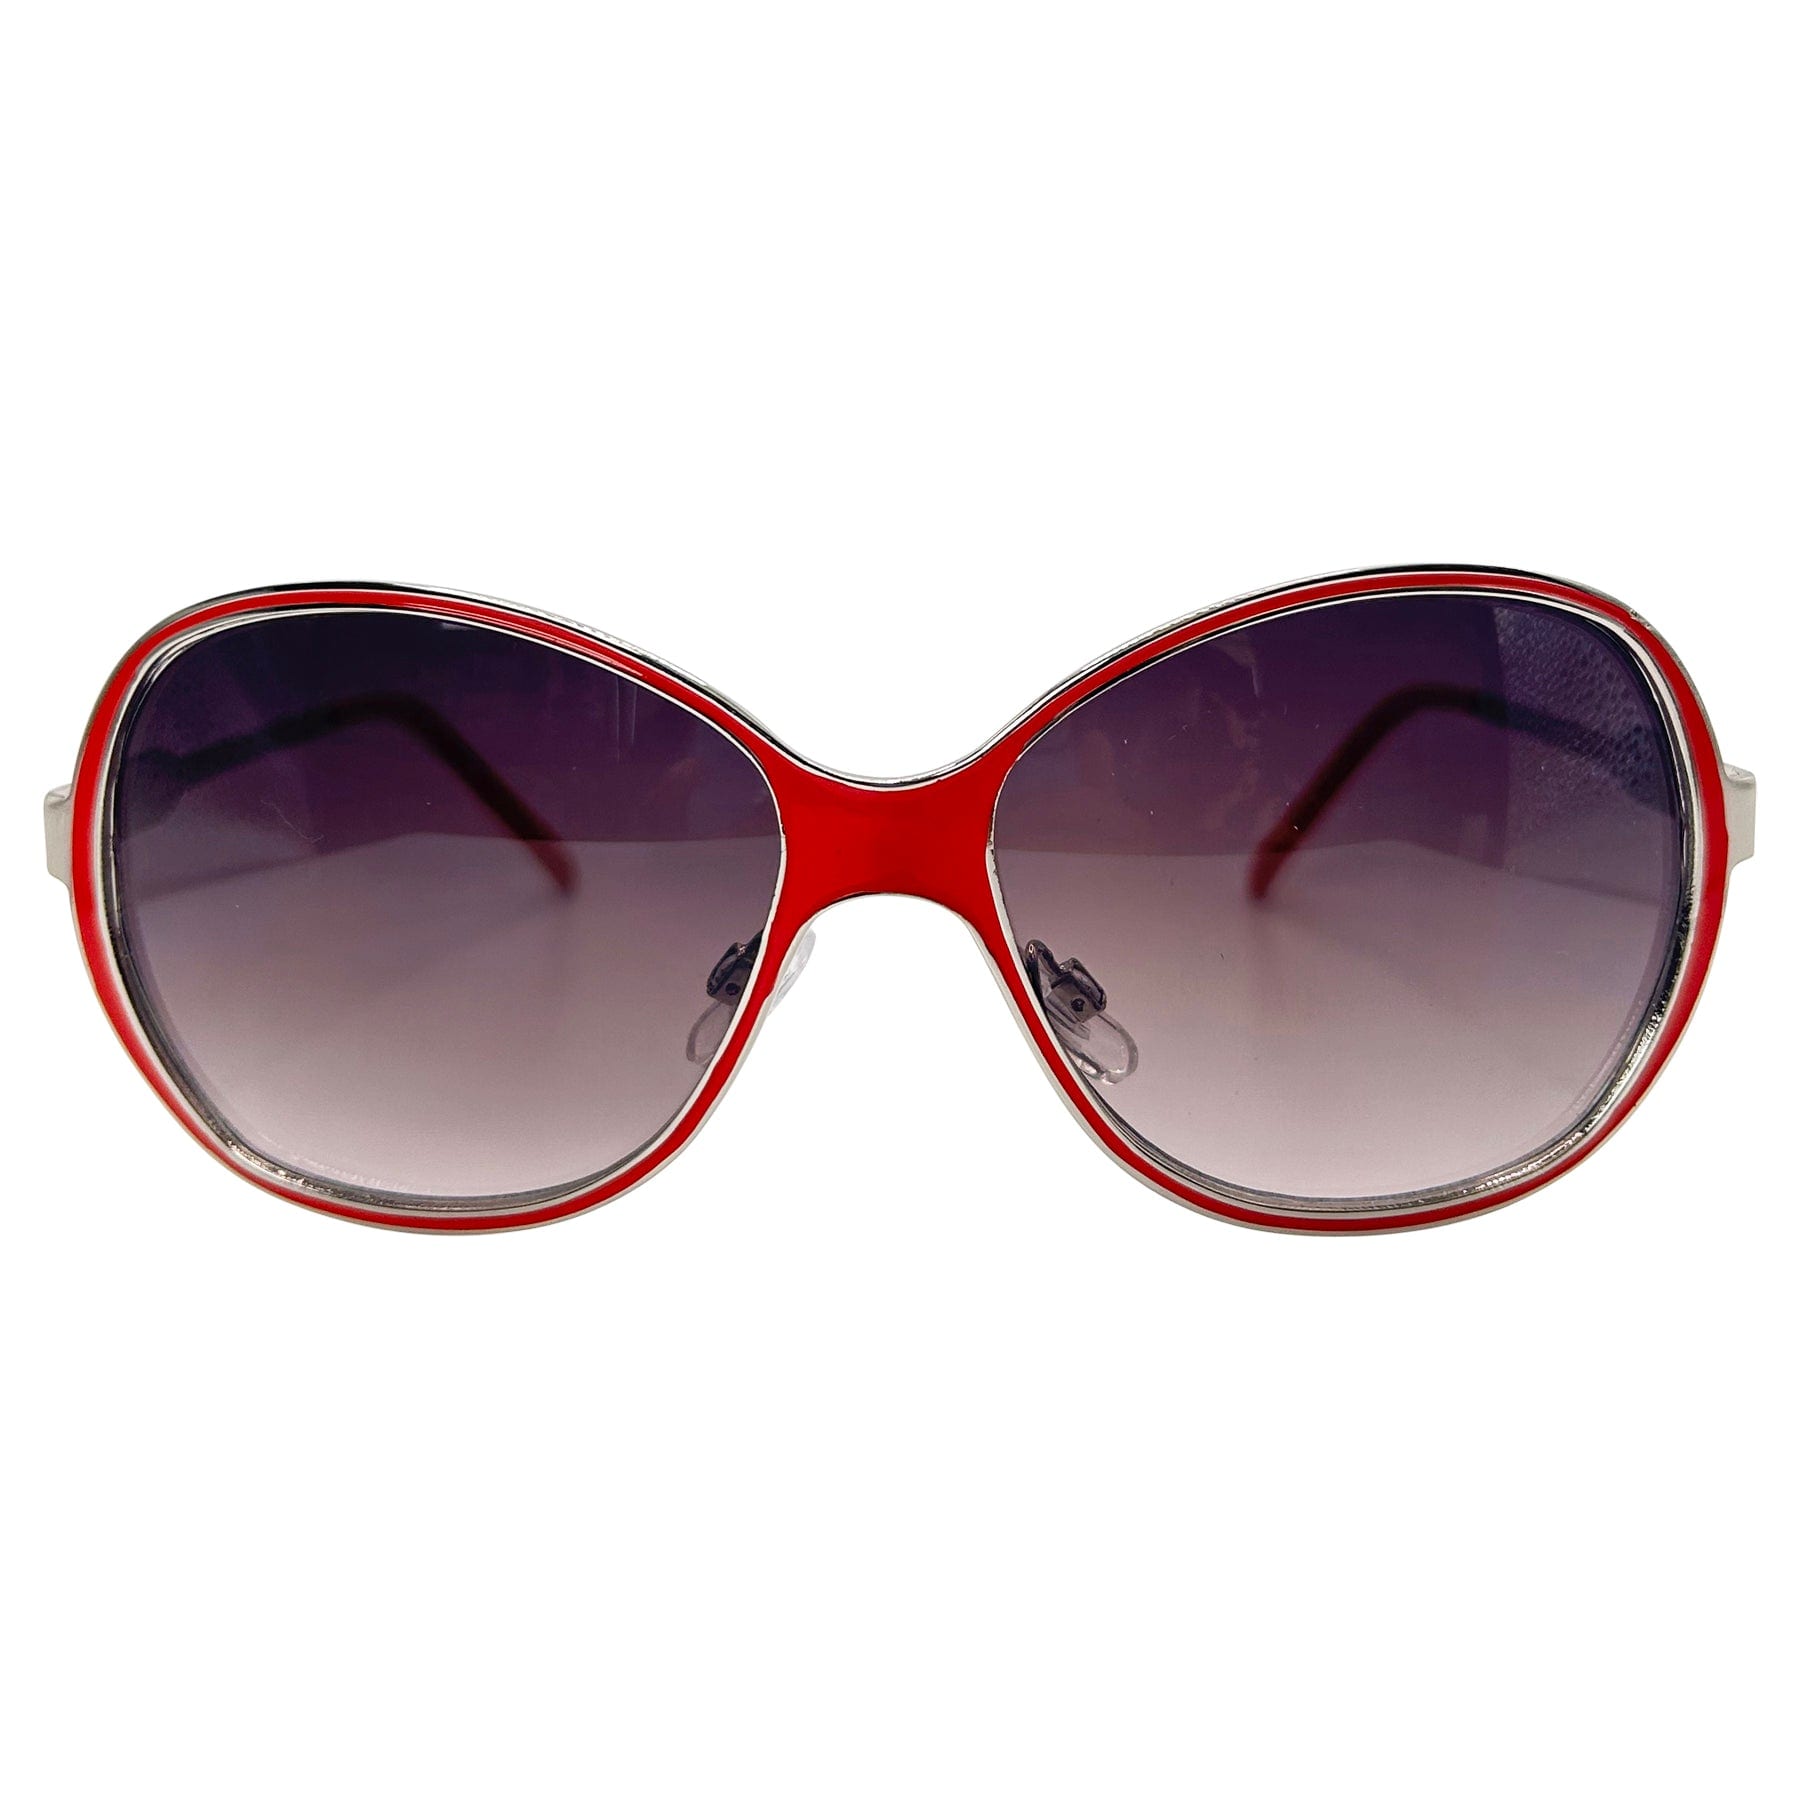 boho chic red sunglasses with a metal frame 